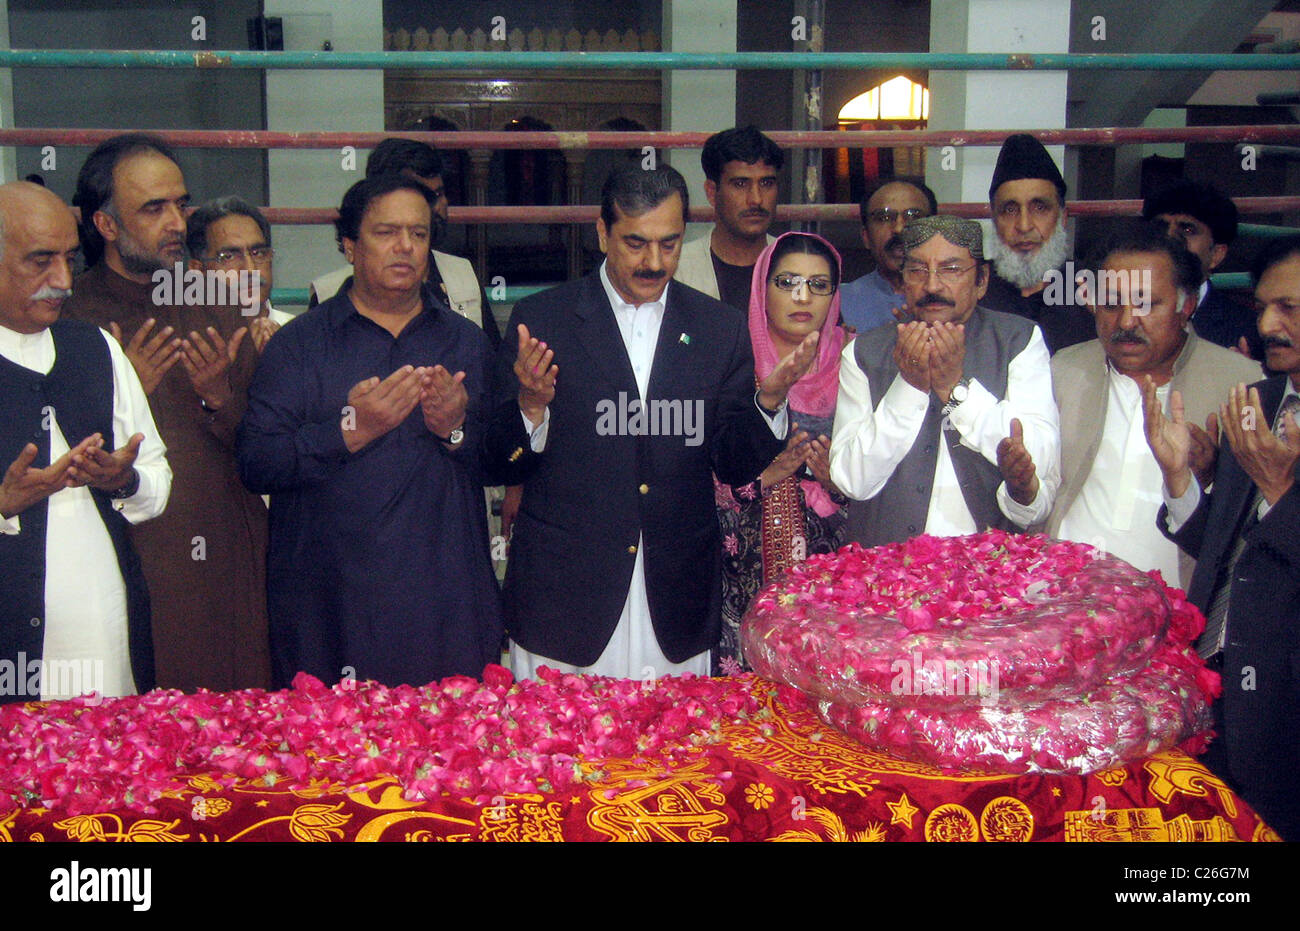 Prime Minister, Syed Yousuf Raza Gilani offers Dua (pray) at the Grave of Zulfiqar Ali Bhutto Founder of Peoples Party (PPP) Stock Photo